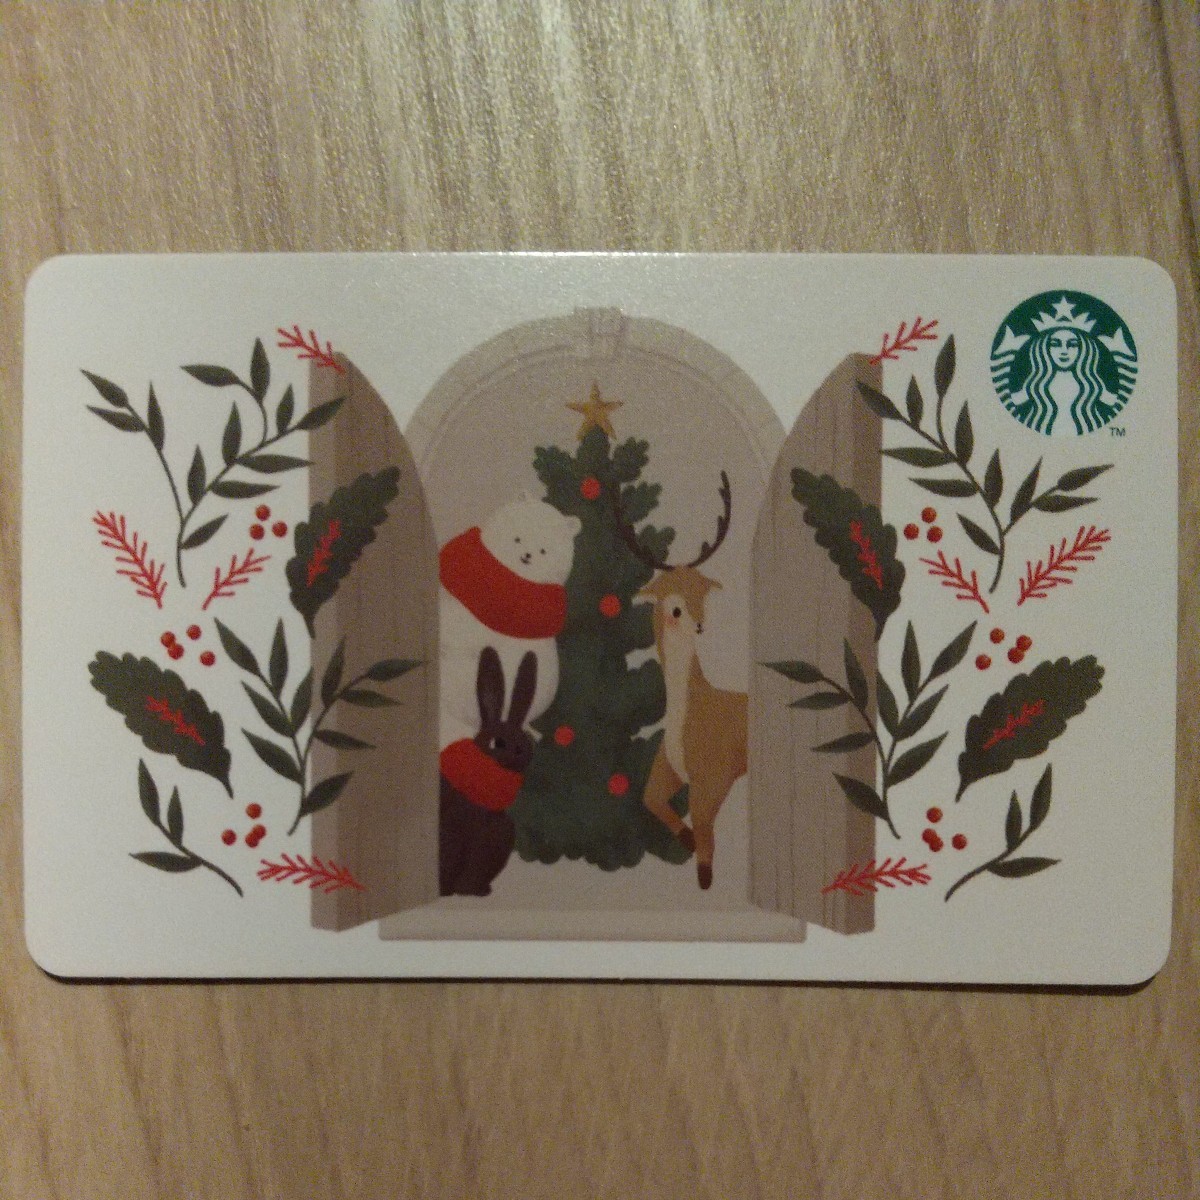 [ Starbucks card ] animal z*1000 jpy minute payment settled *PIN not yet shaving * postage 63 jpy ~